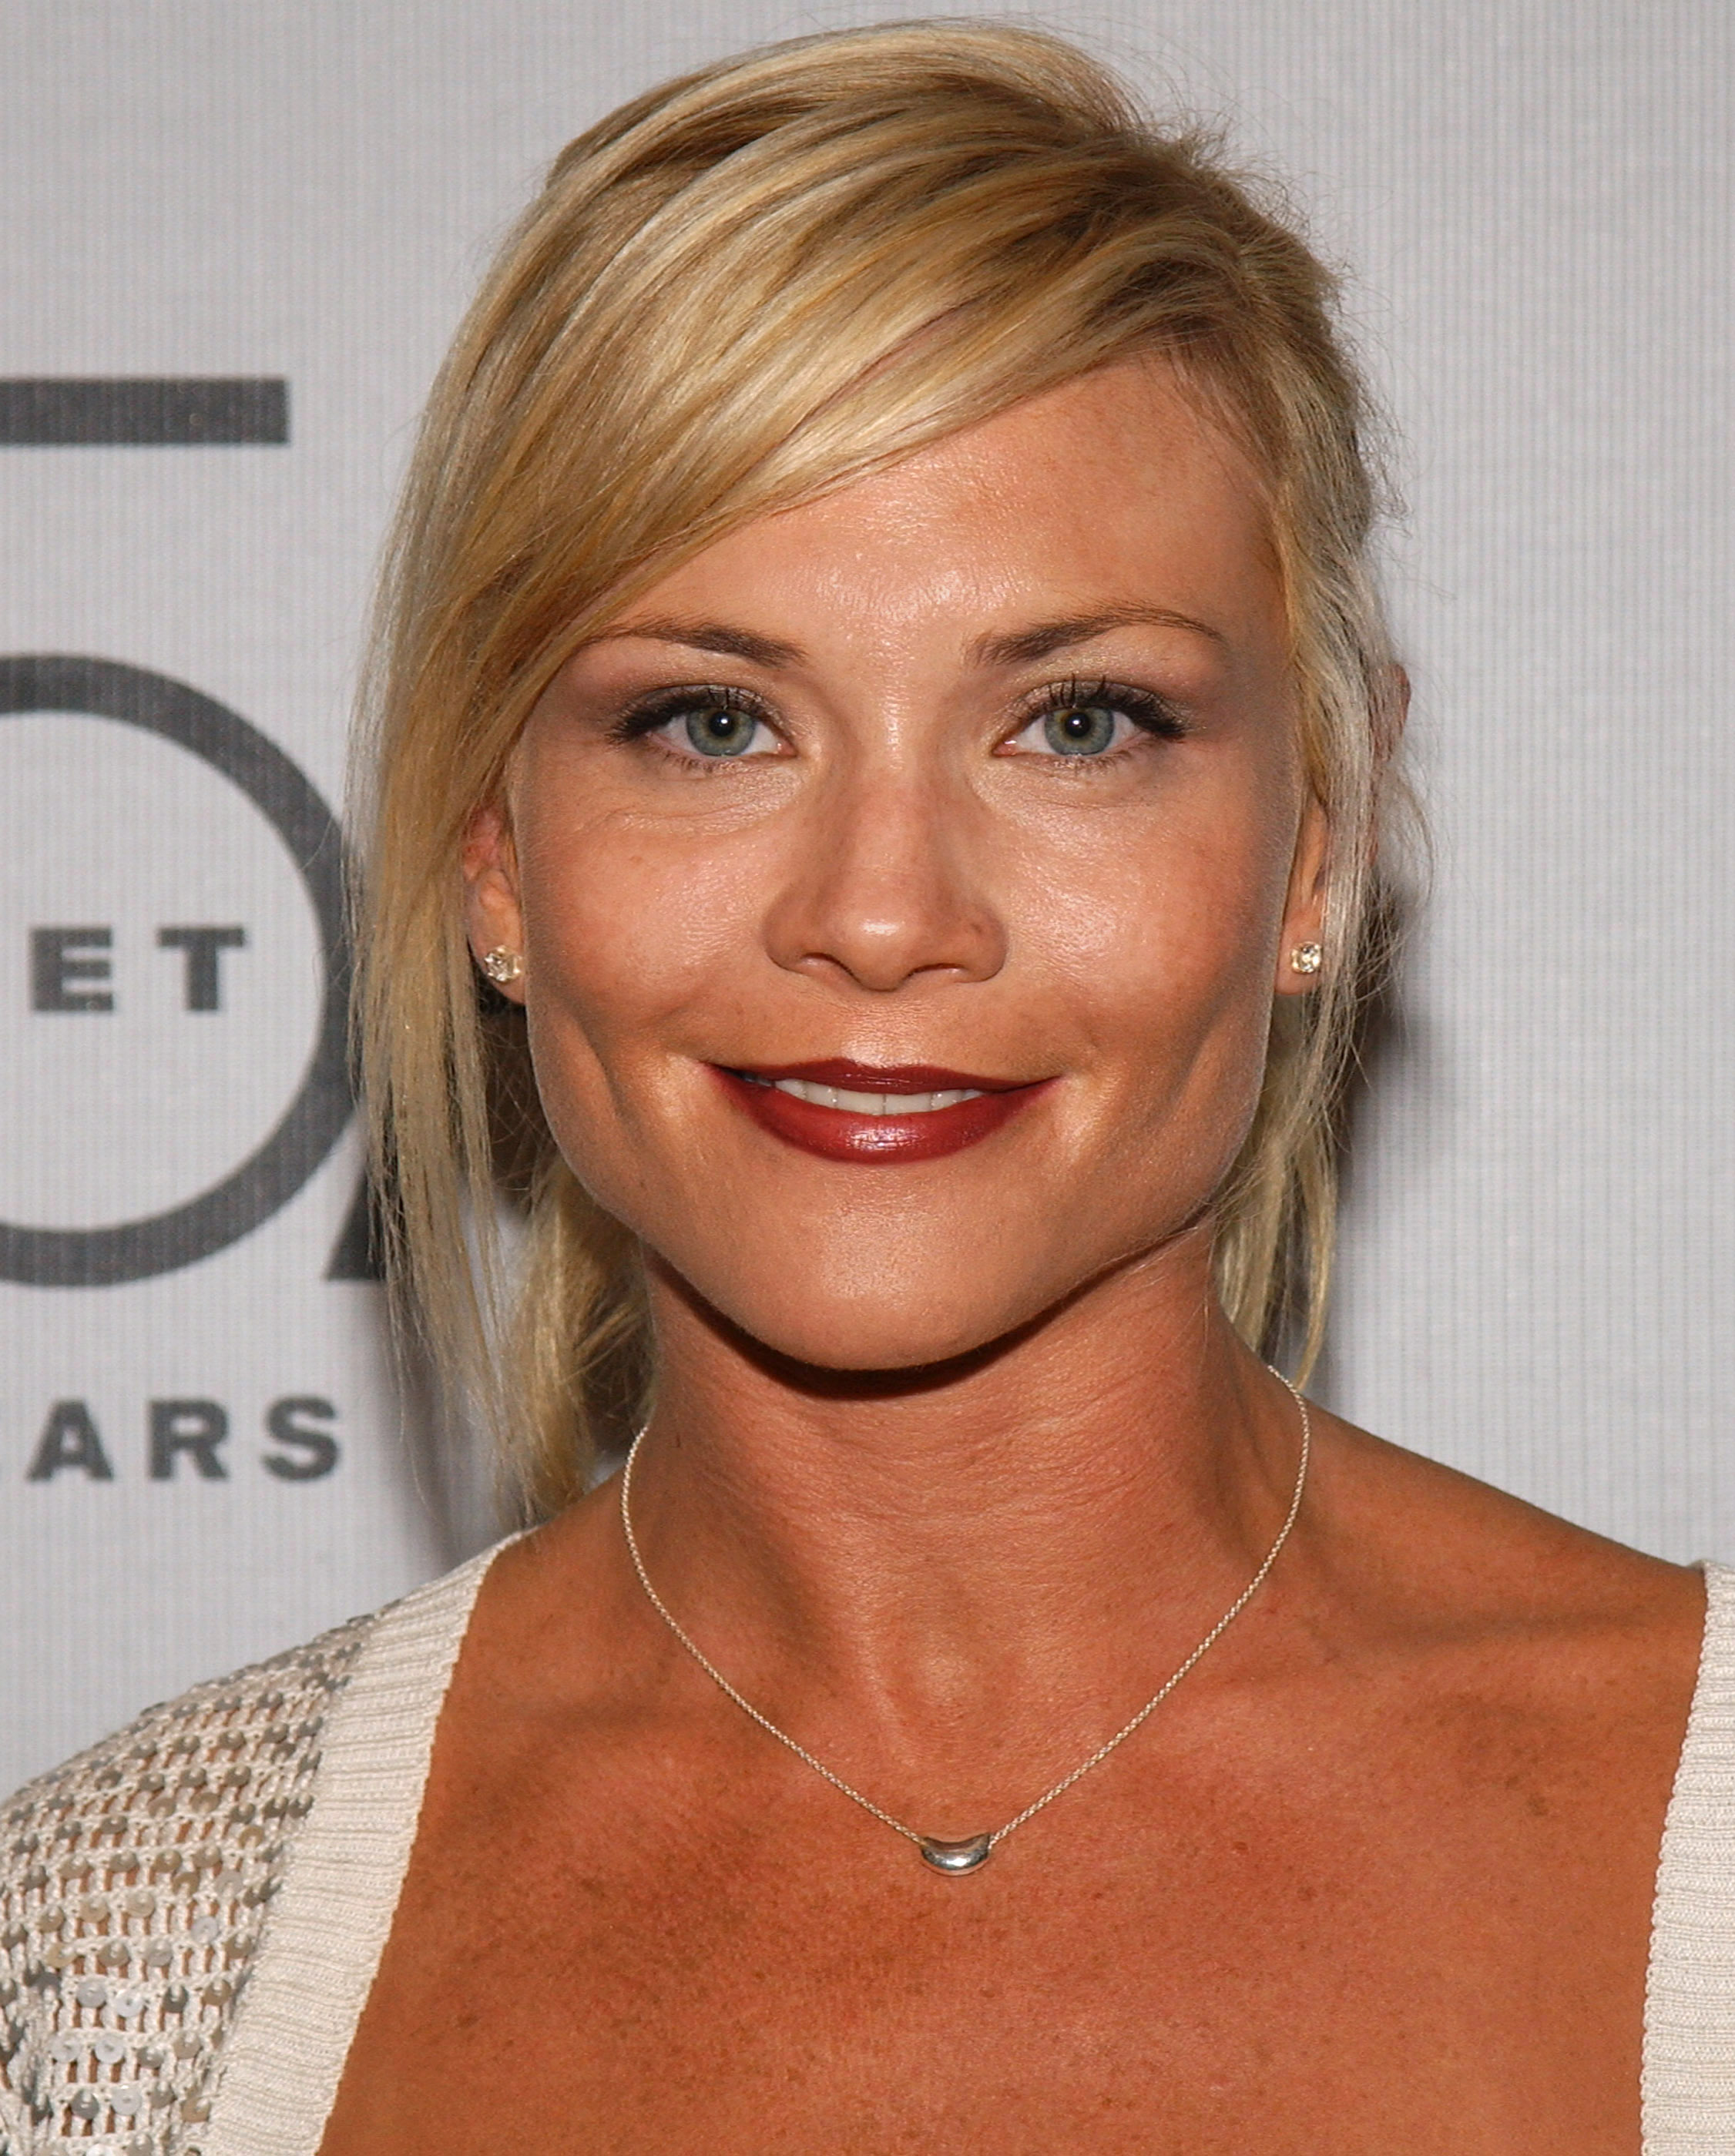 Amy Locane at Soapnet's 5th Anniversary Party in 2005 | Source: Getty Images